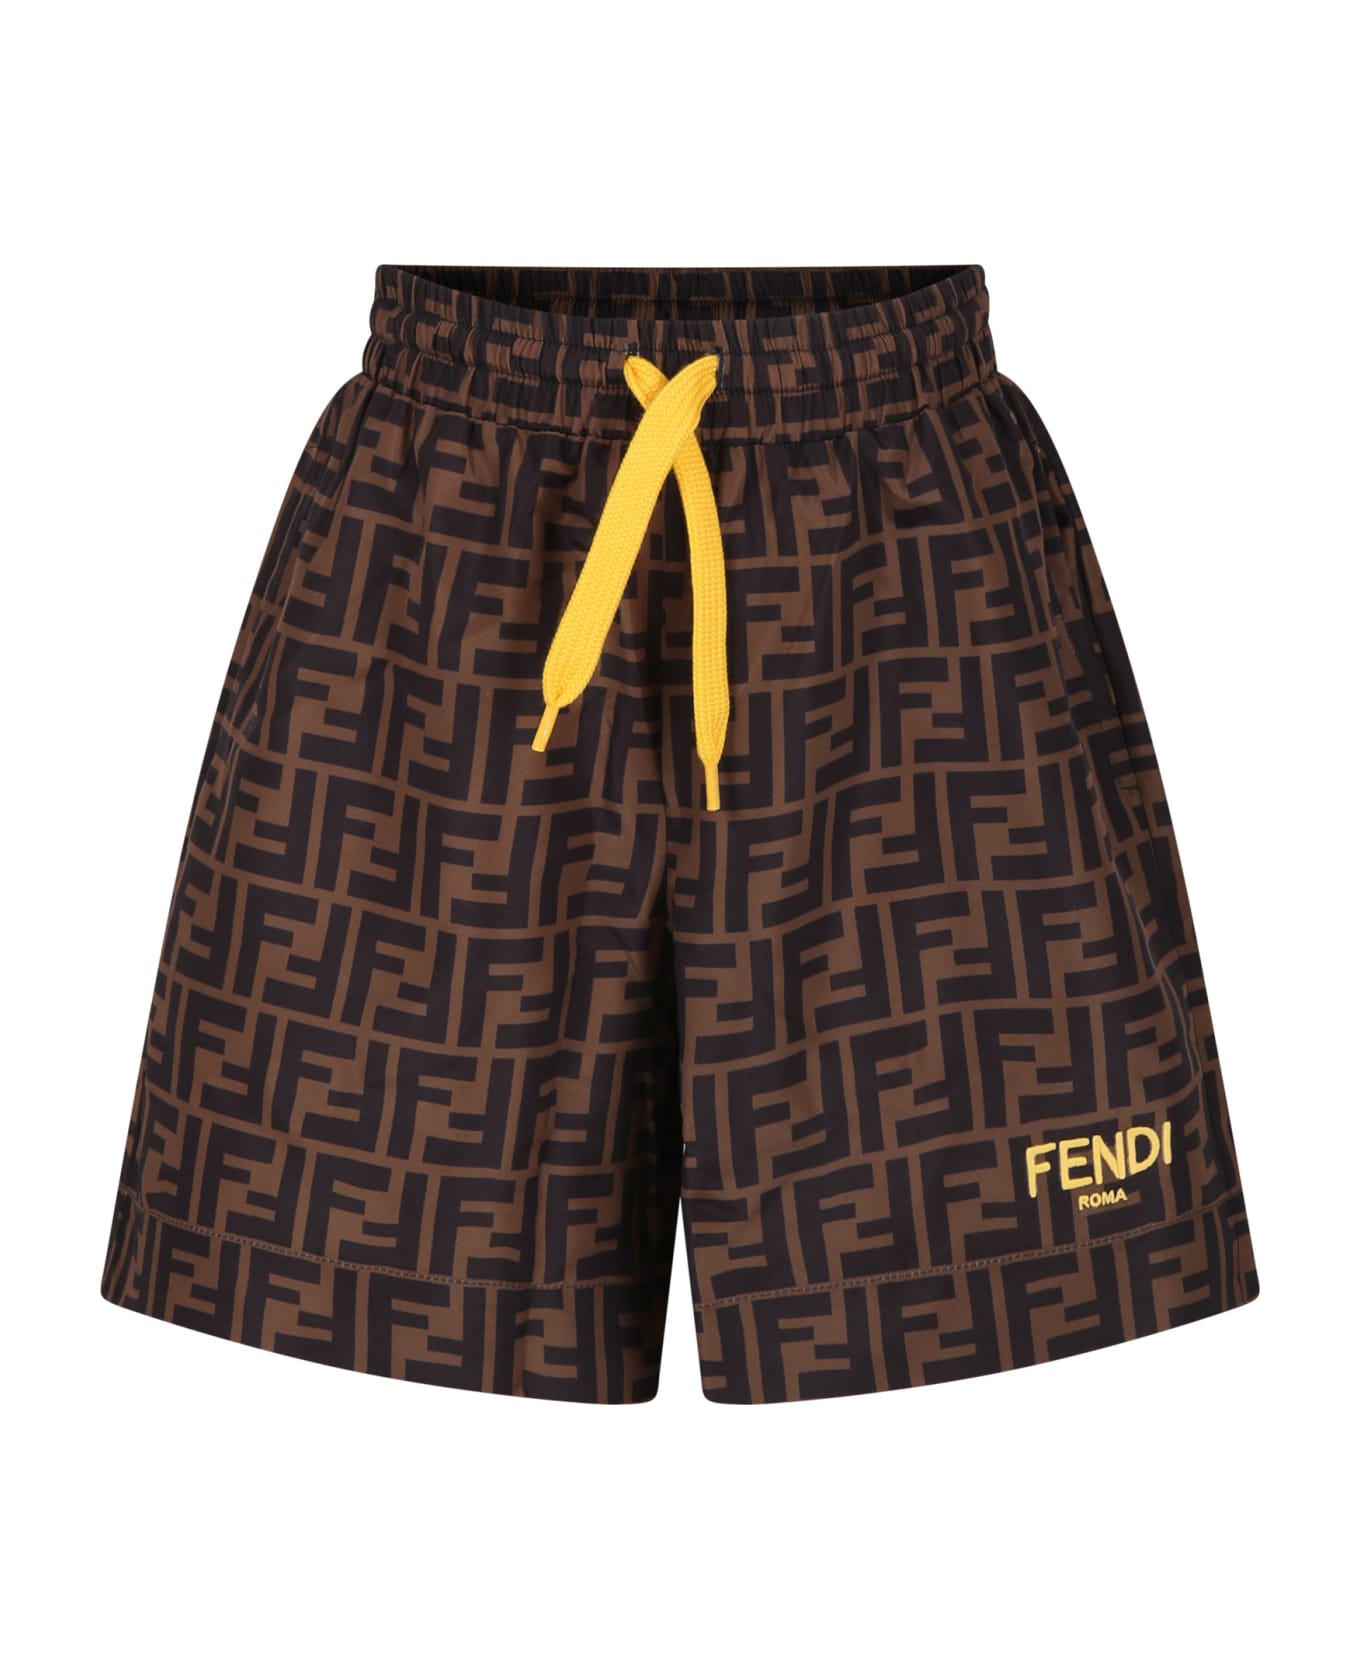 Fendi Brown Swim Shorts For Boy With Iconic Ff And BAG fendi Logo - Brown